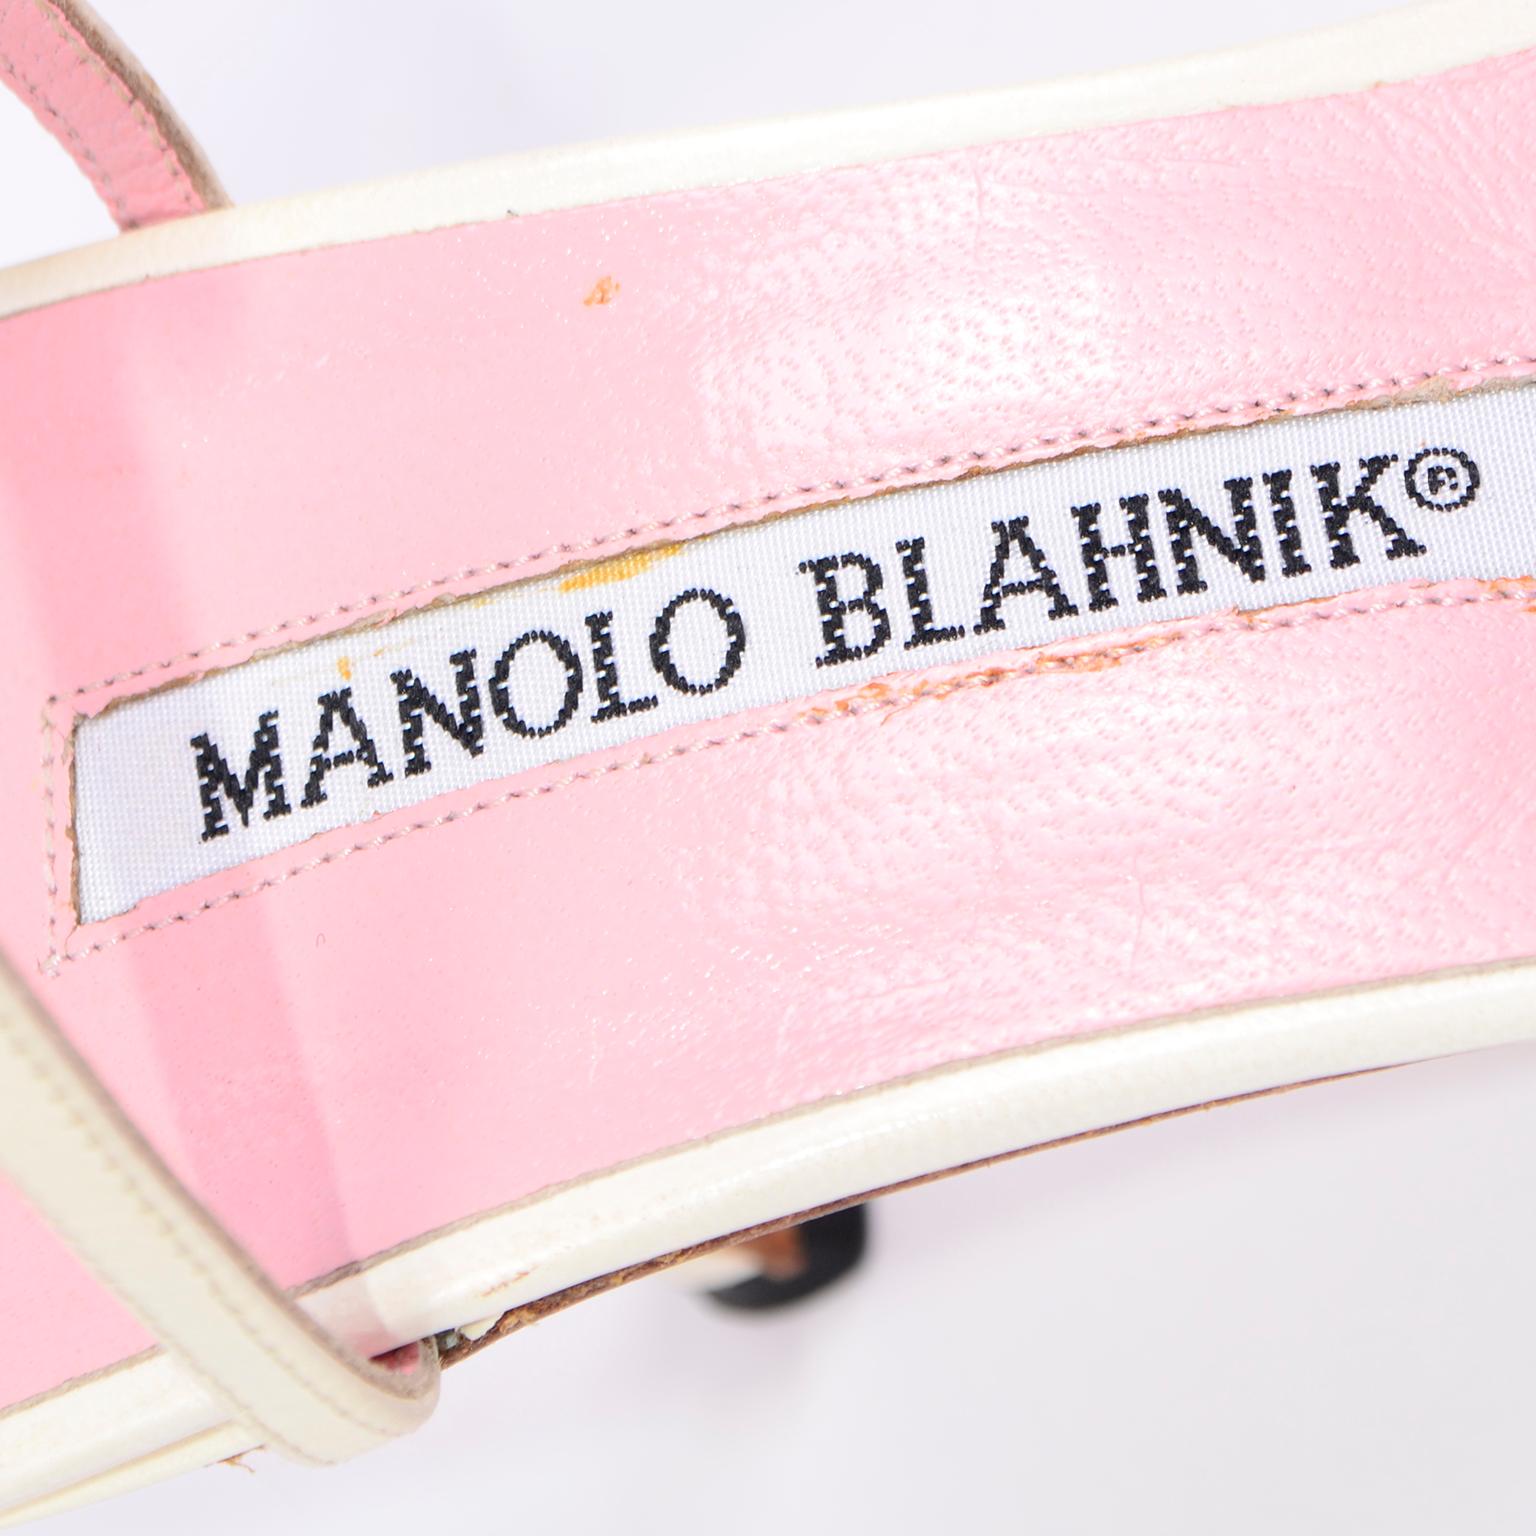 Ivory Leather Manolo Blahnik Shoes With Pink Daisy Flowers and Ankle Straps 8